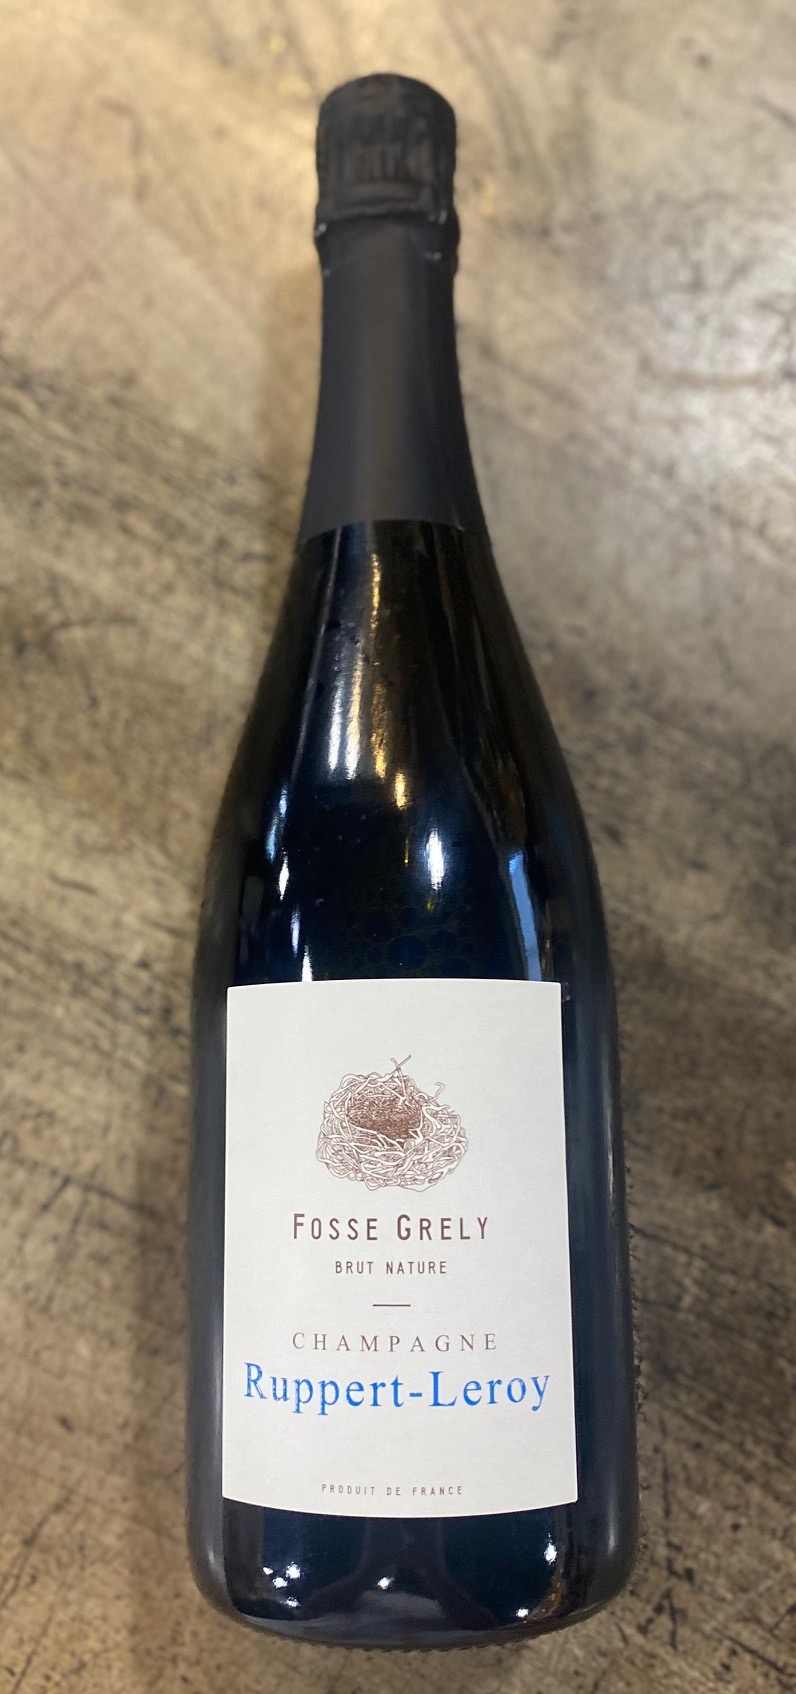 Ruppert-Leroy - Fosse-Grely Brut Nature 2020 (750)